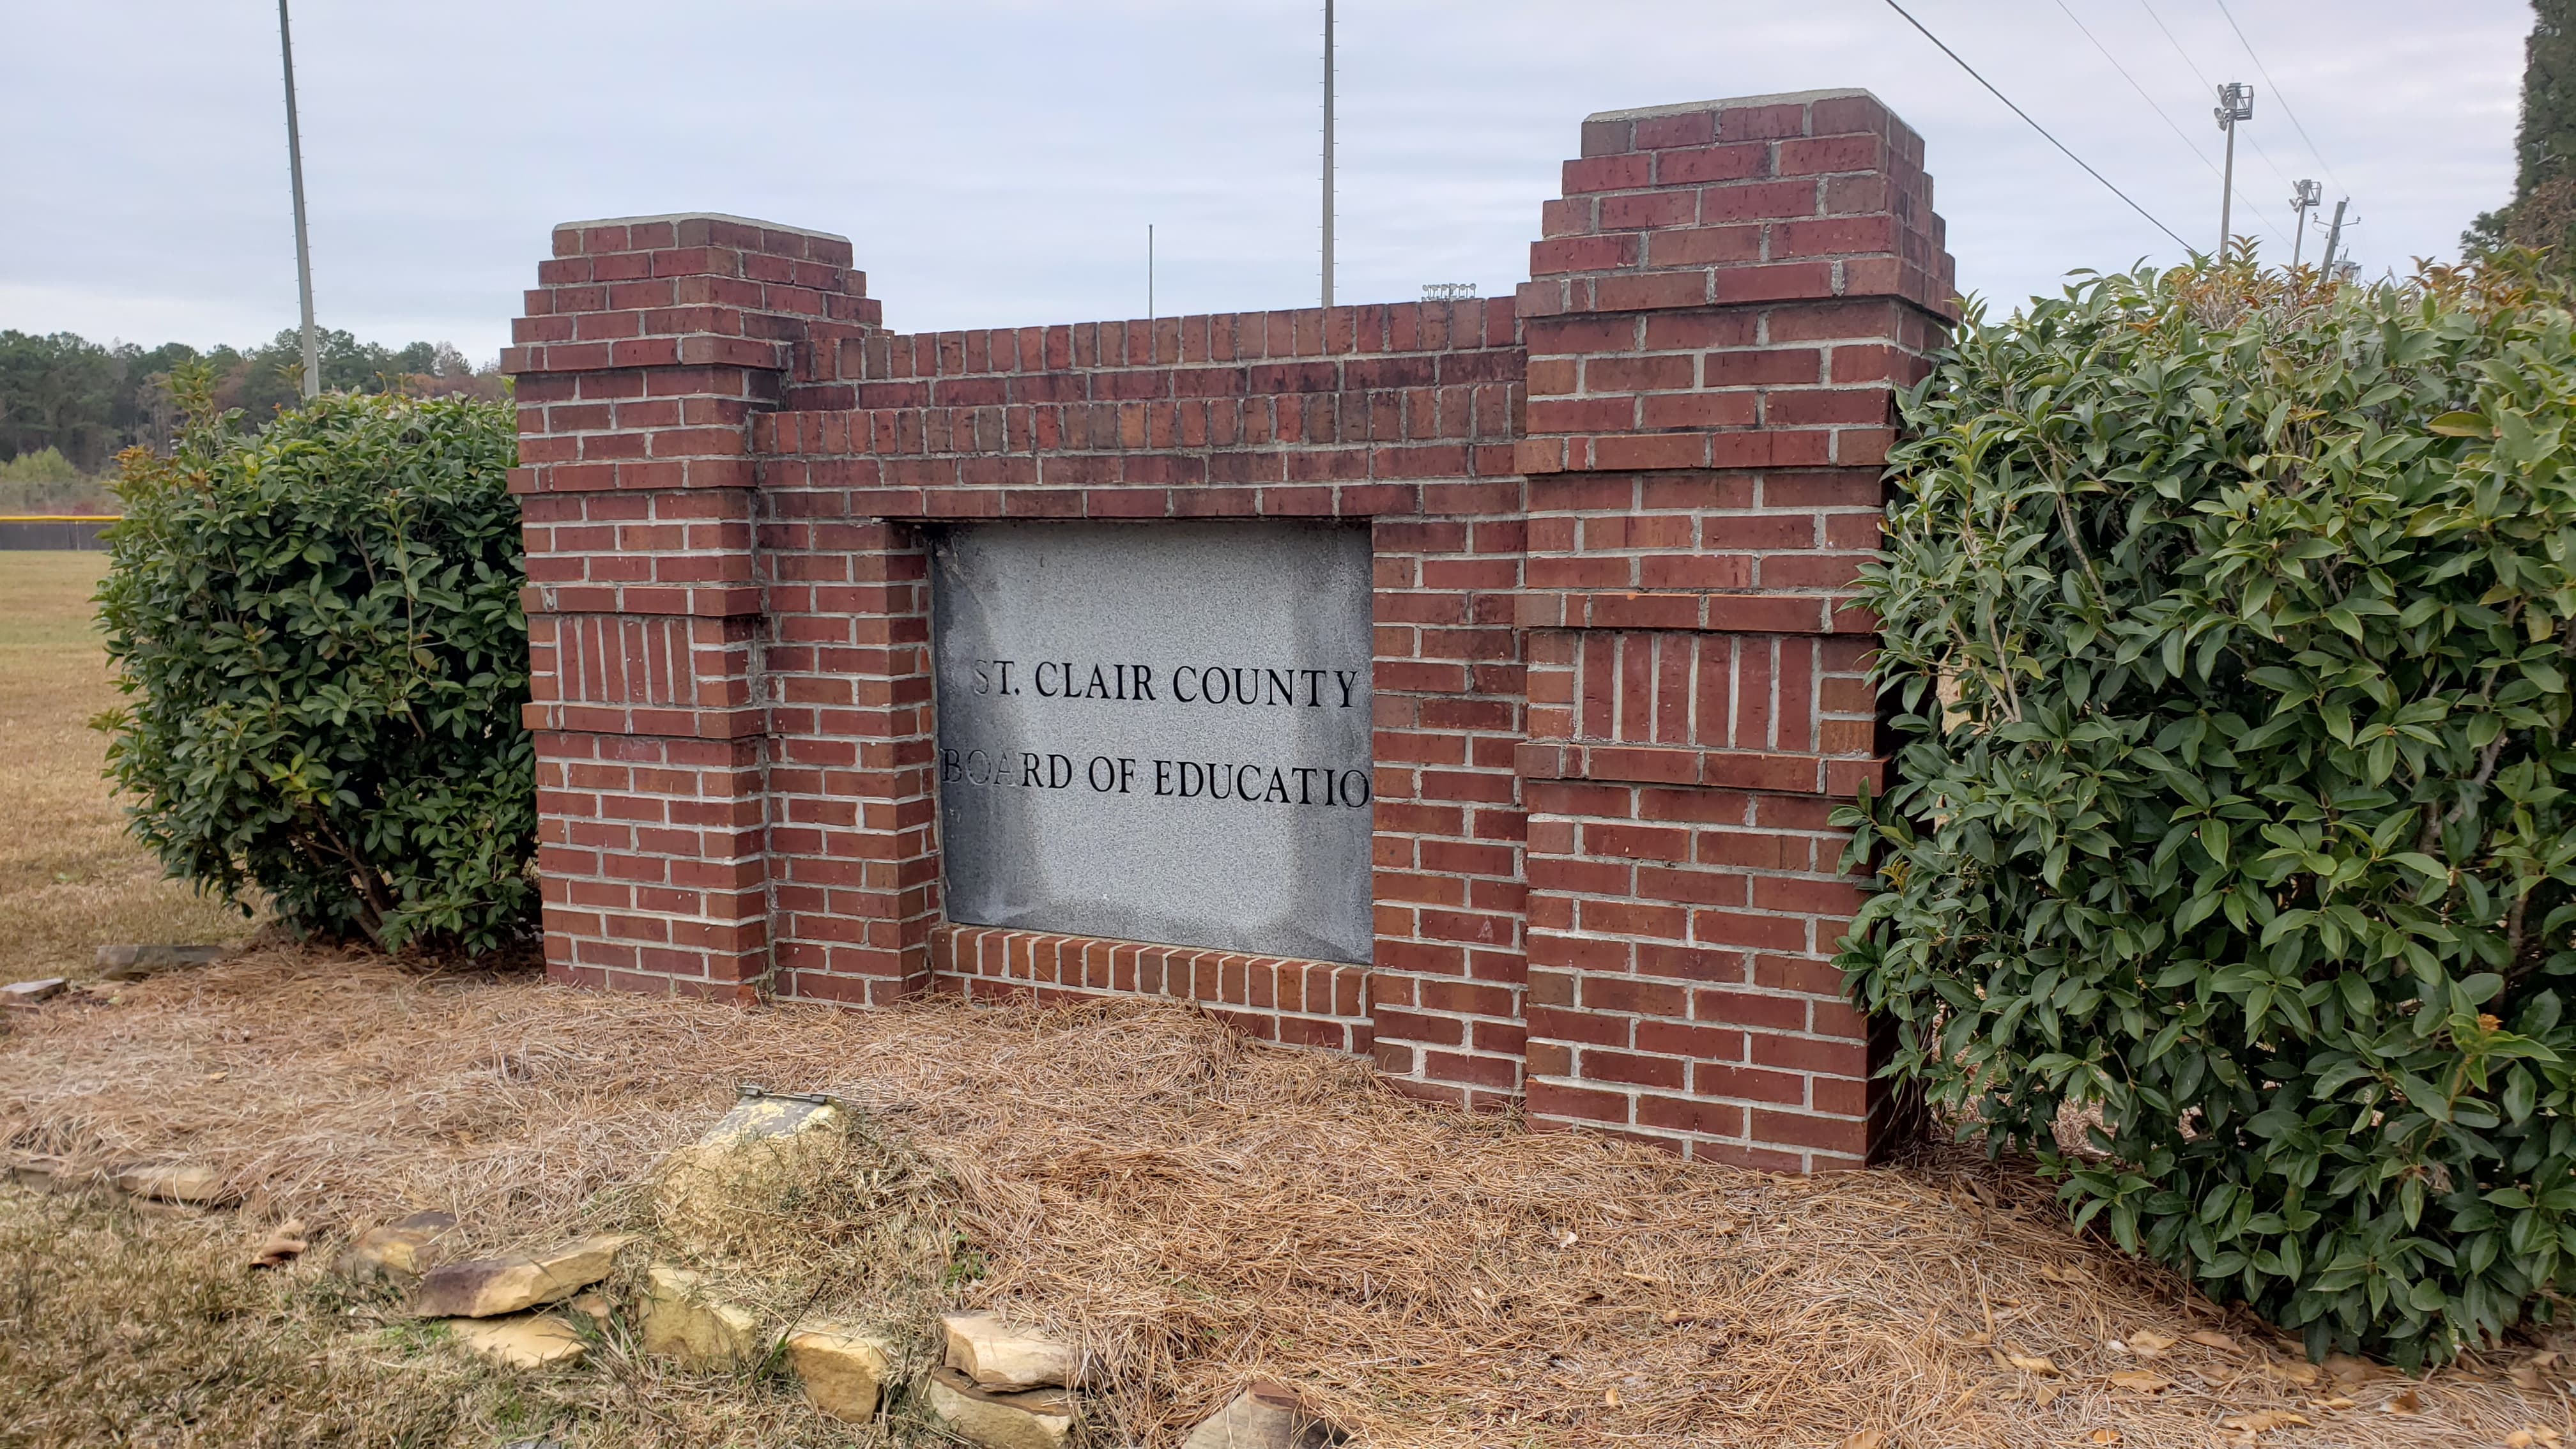 St. Clair County High School student tests positive for COVID-19